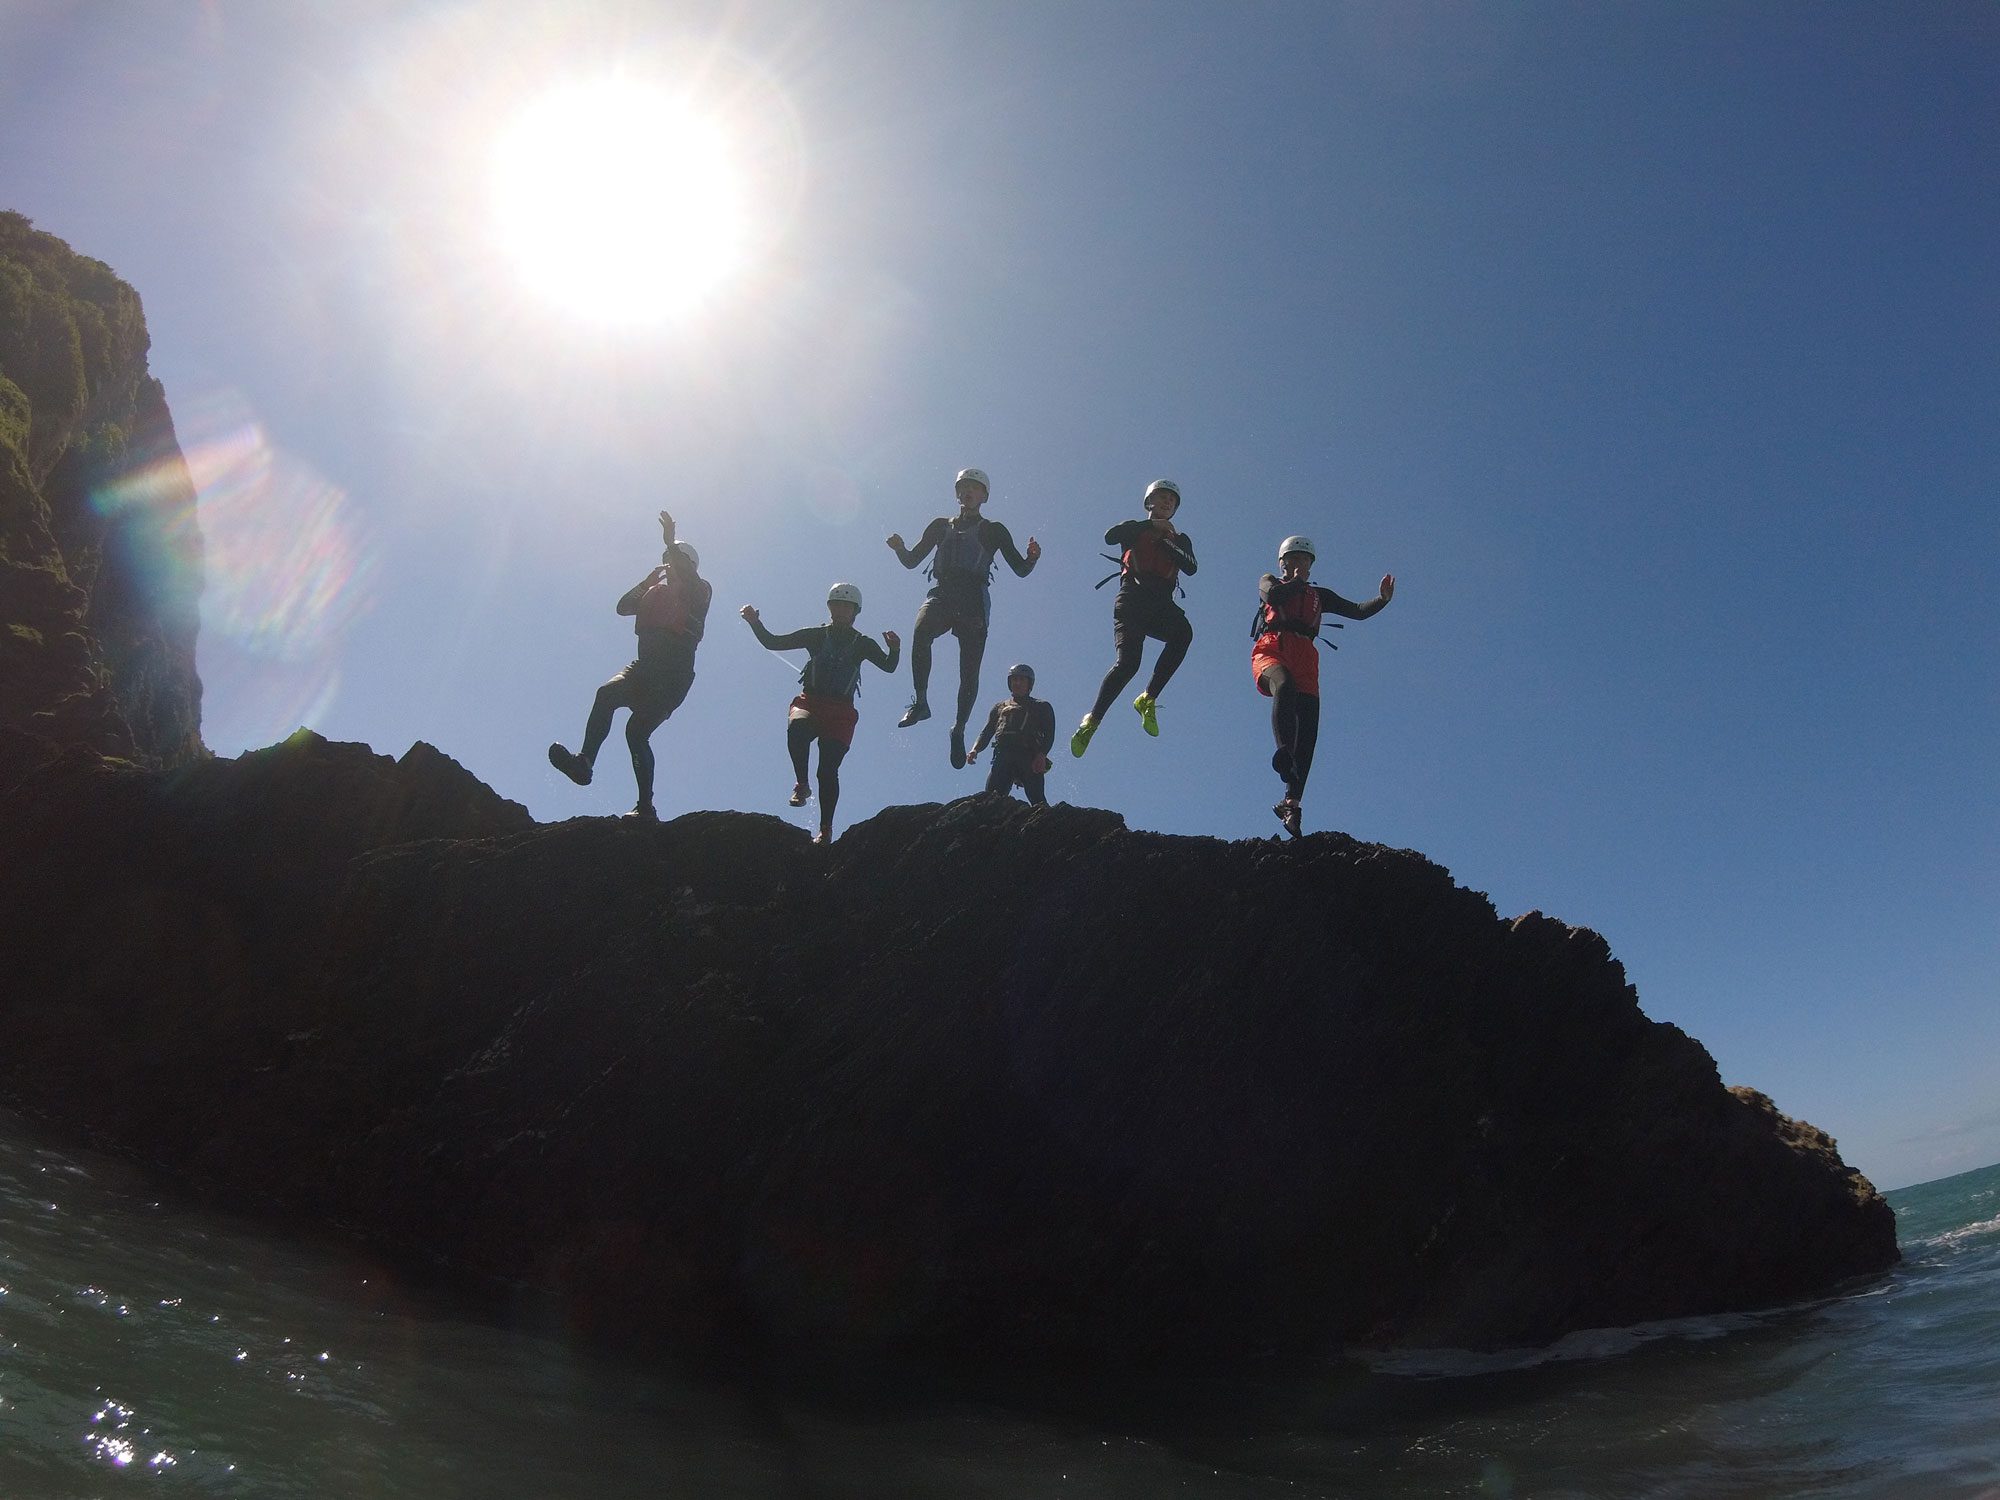 A group of people coasteering jump off a cliff on a corporate away day in North Devon